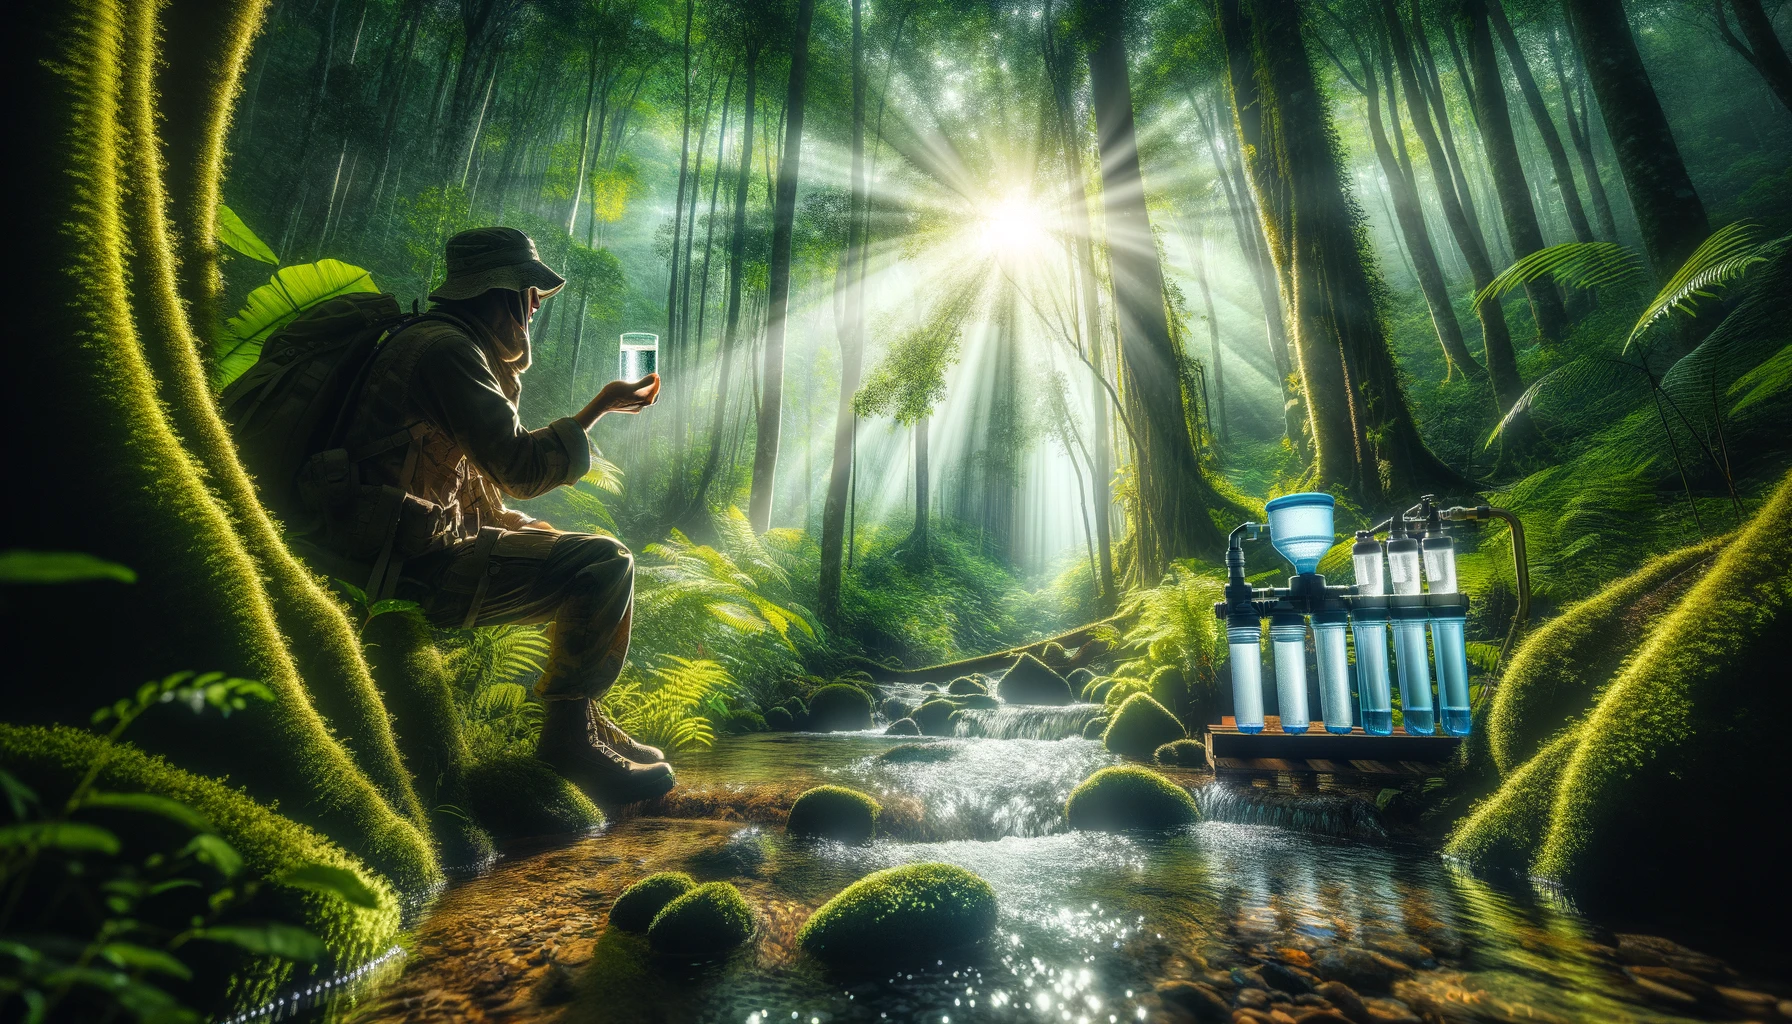 Person in survival gear holding up a glass of clear water to the sunlight in a lush forest, with a DIY filtration system in the background, symbolizing the achievement of securing safe drinking water through self-reliance and ingenuity